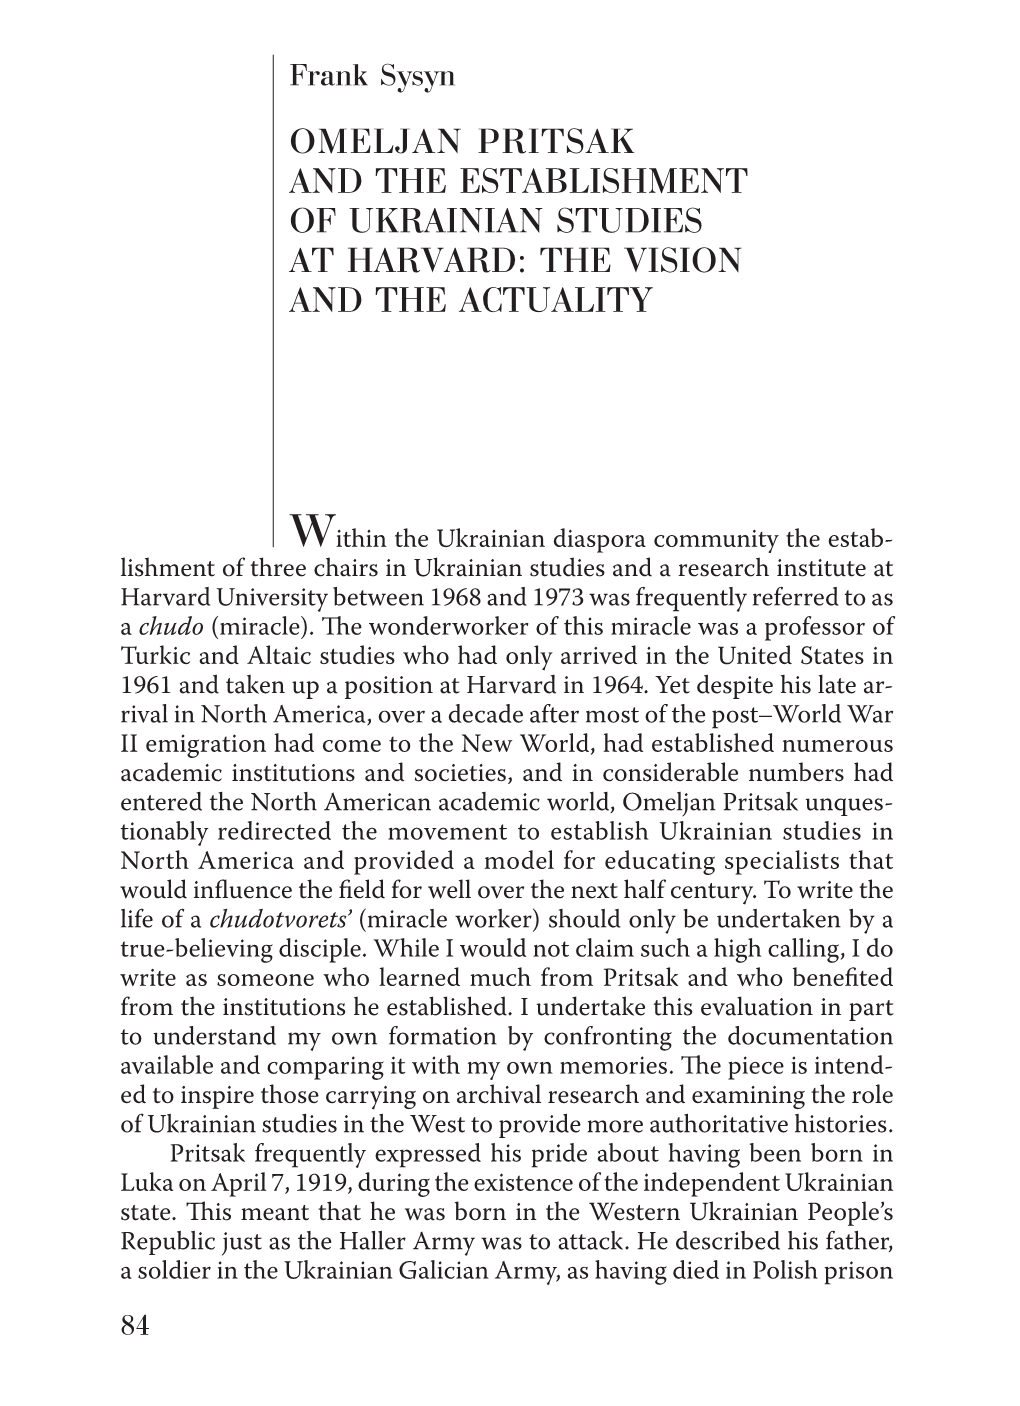 Omeljan Pritsak and the Establishment of Ukrainian Studies at Harvard: the Vision and the Actuality